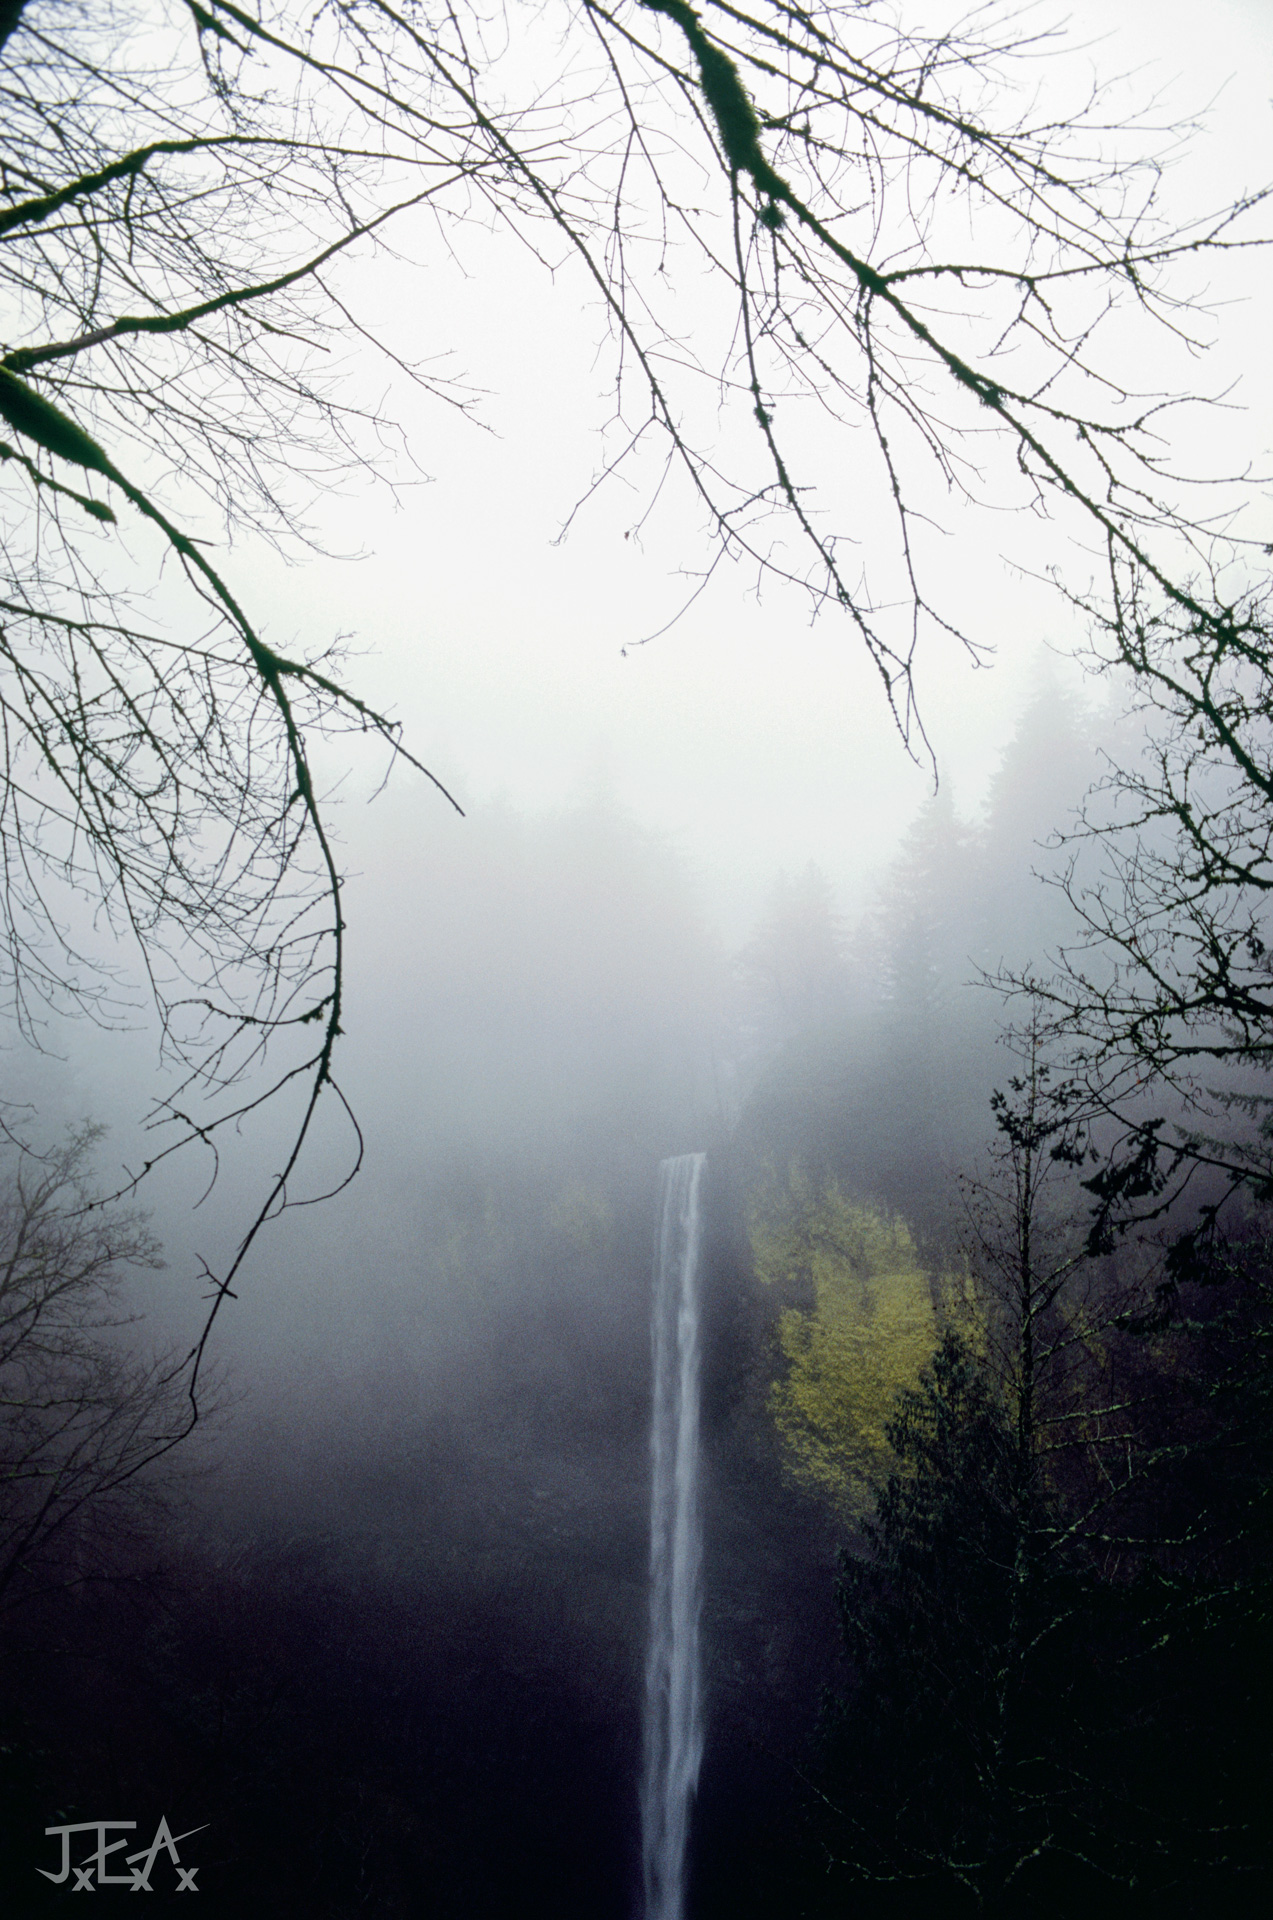 A shot of Latourell Falls, Oregon on a foggy afternoon, seen through tree baranches.